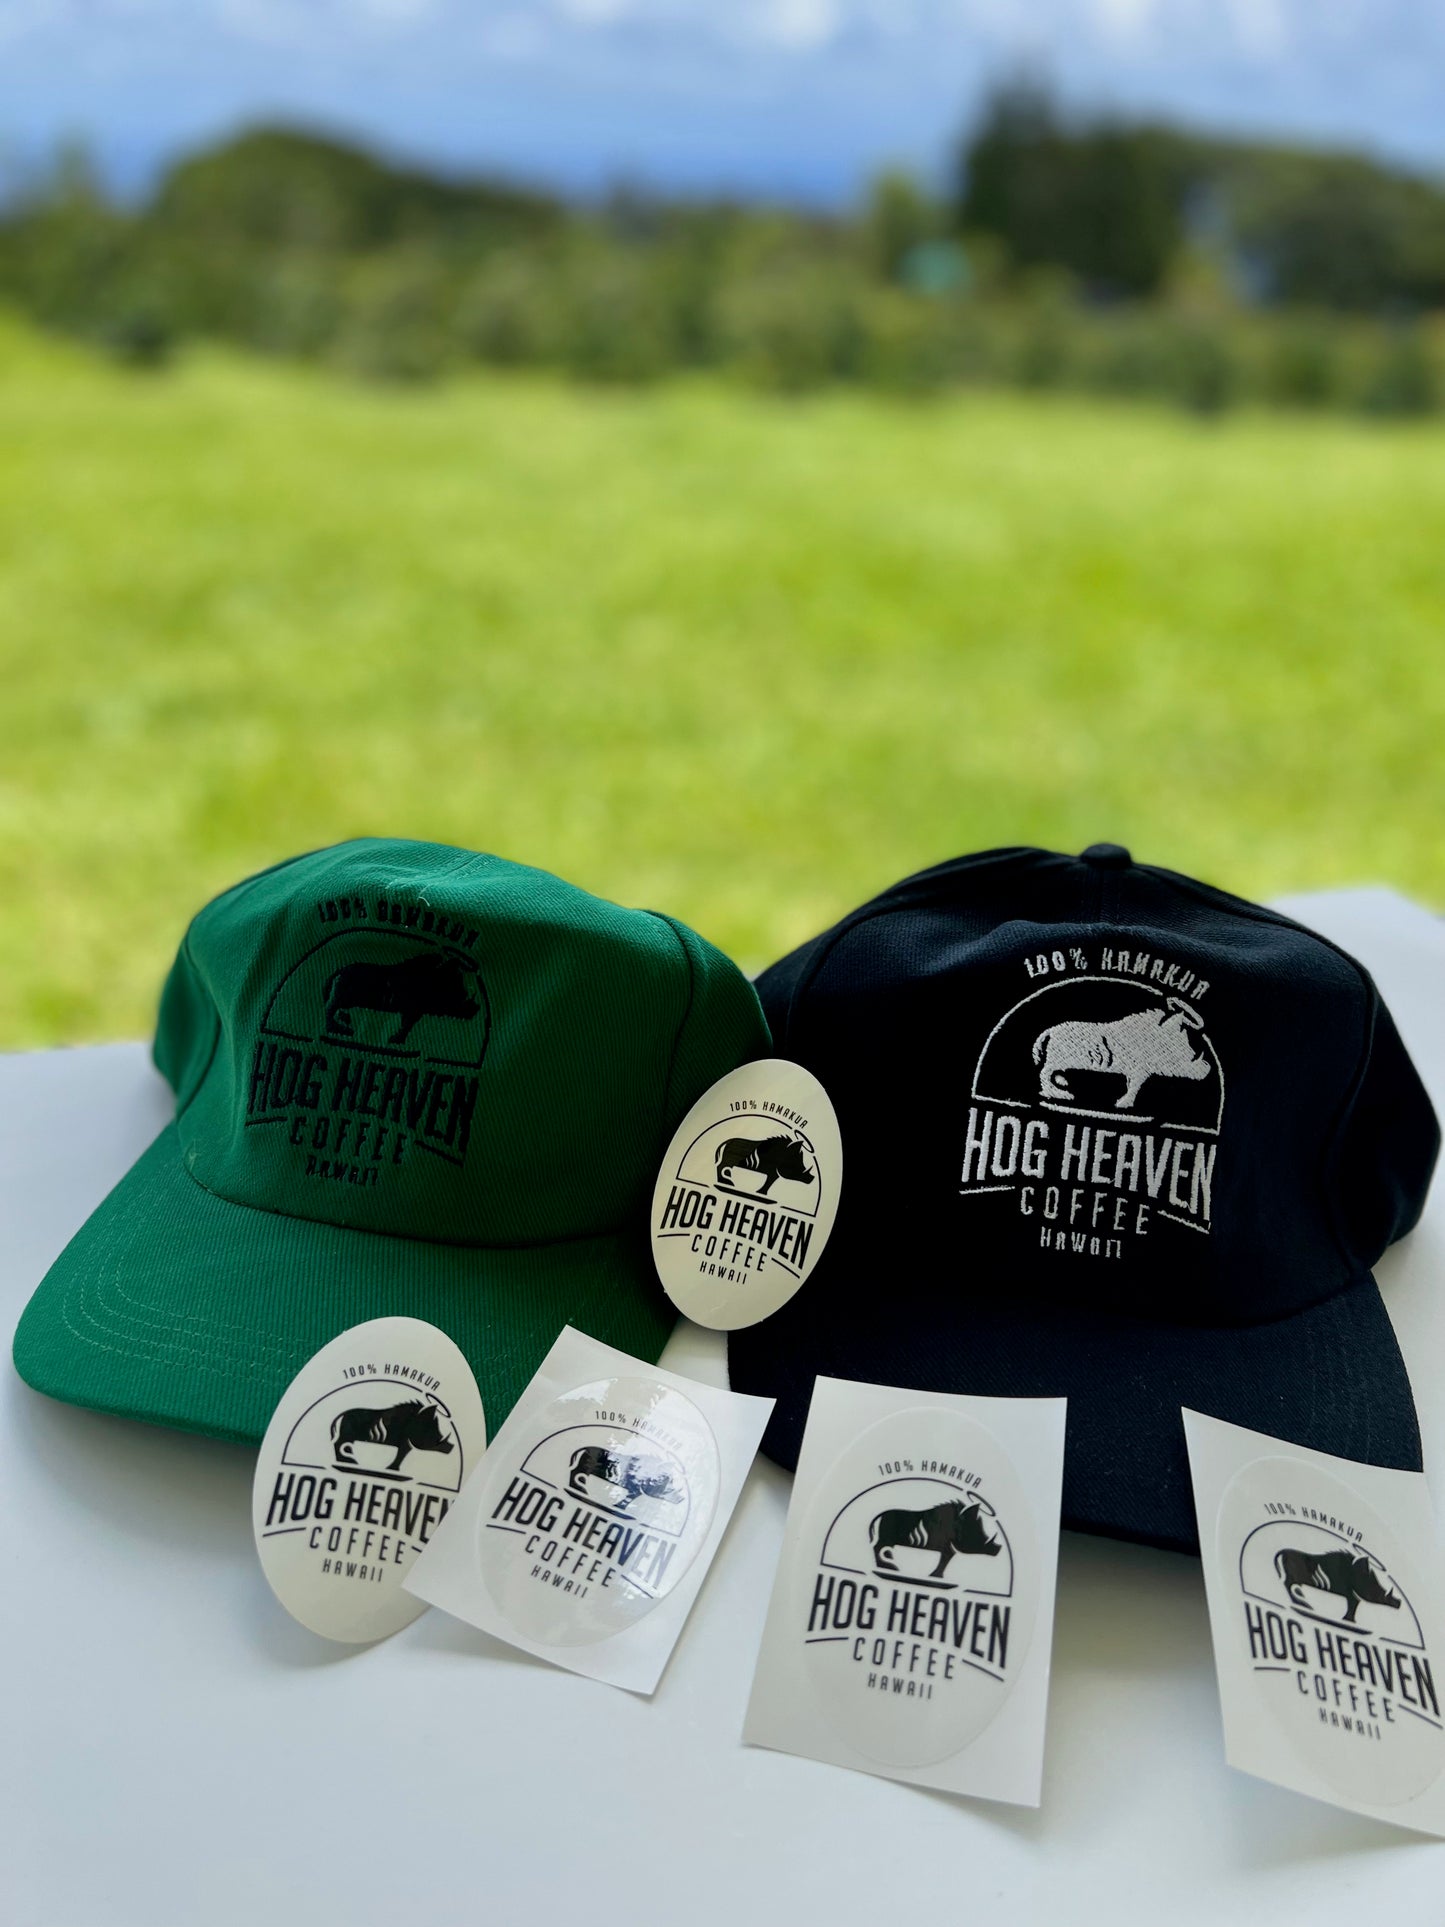 hog heaven coffee hats and stickers together